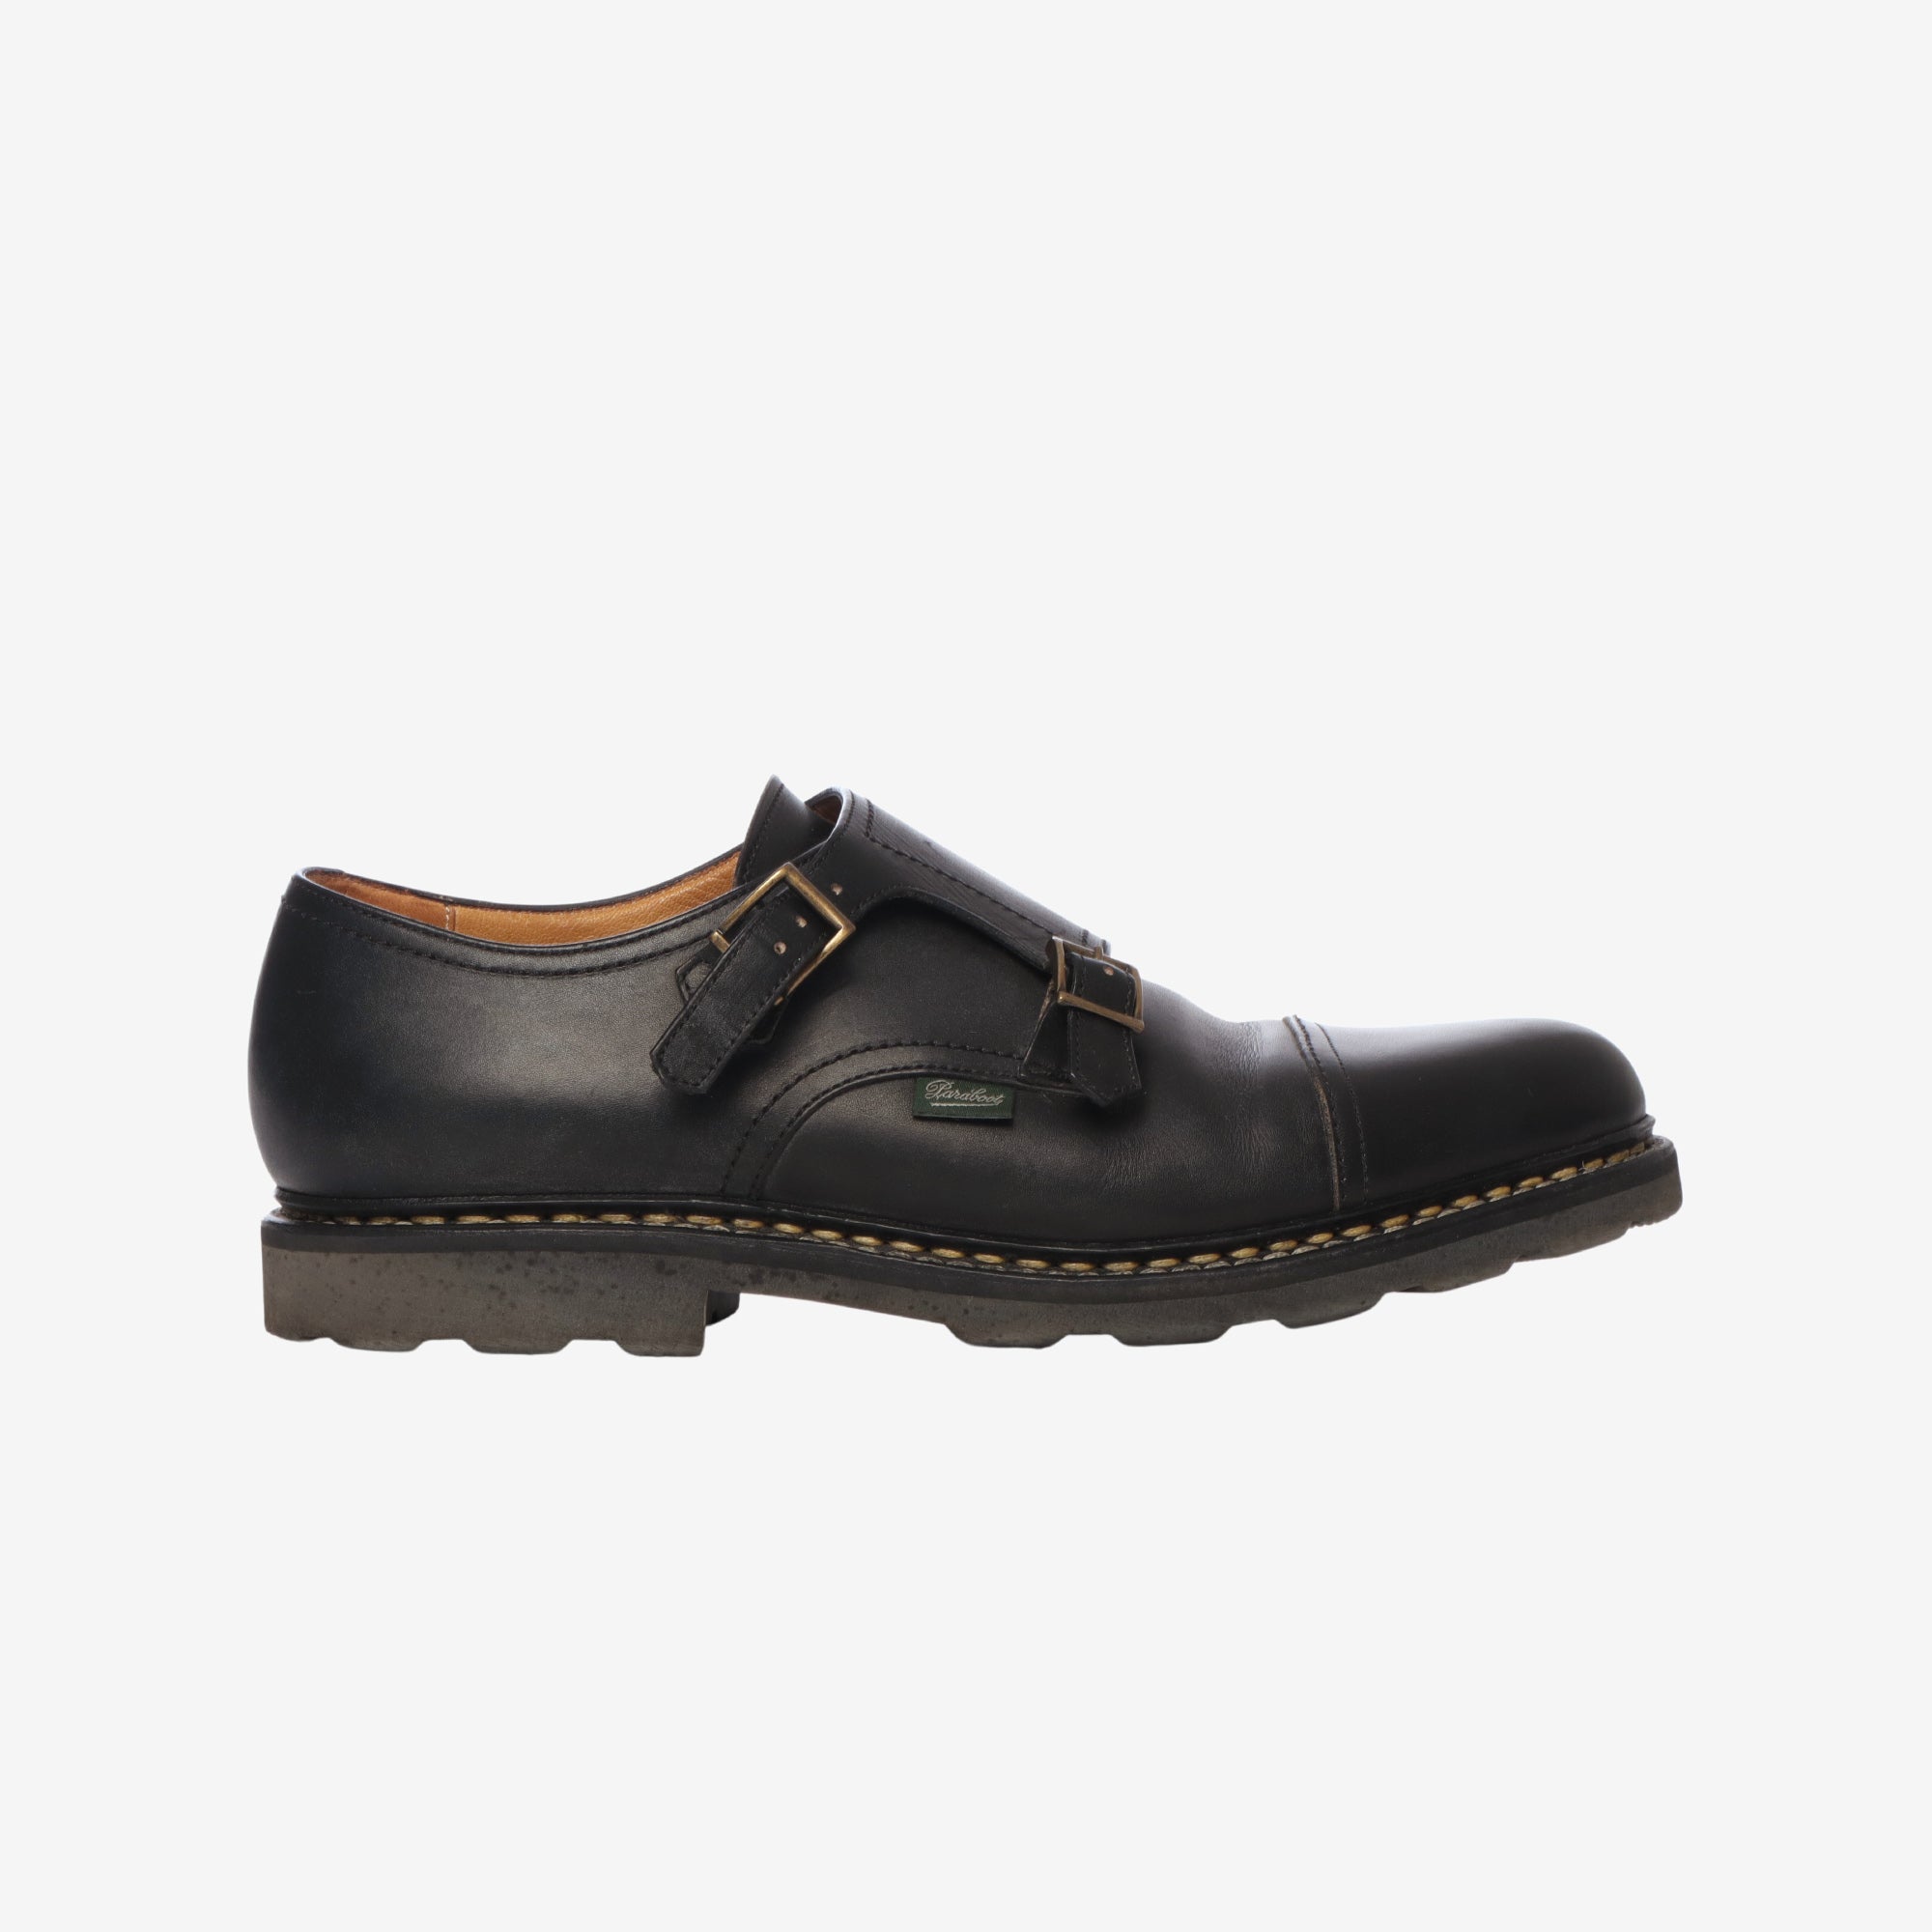 Double Buckle William Shoes